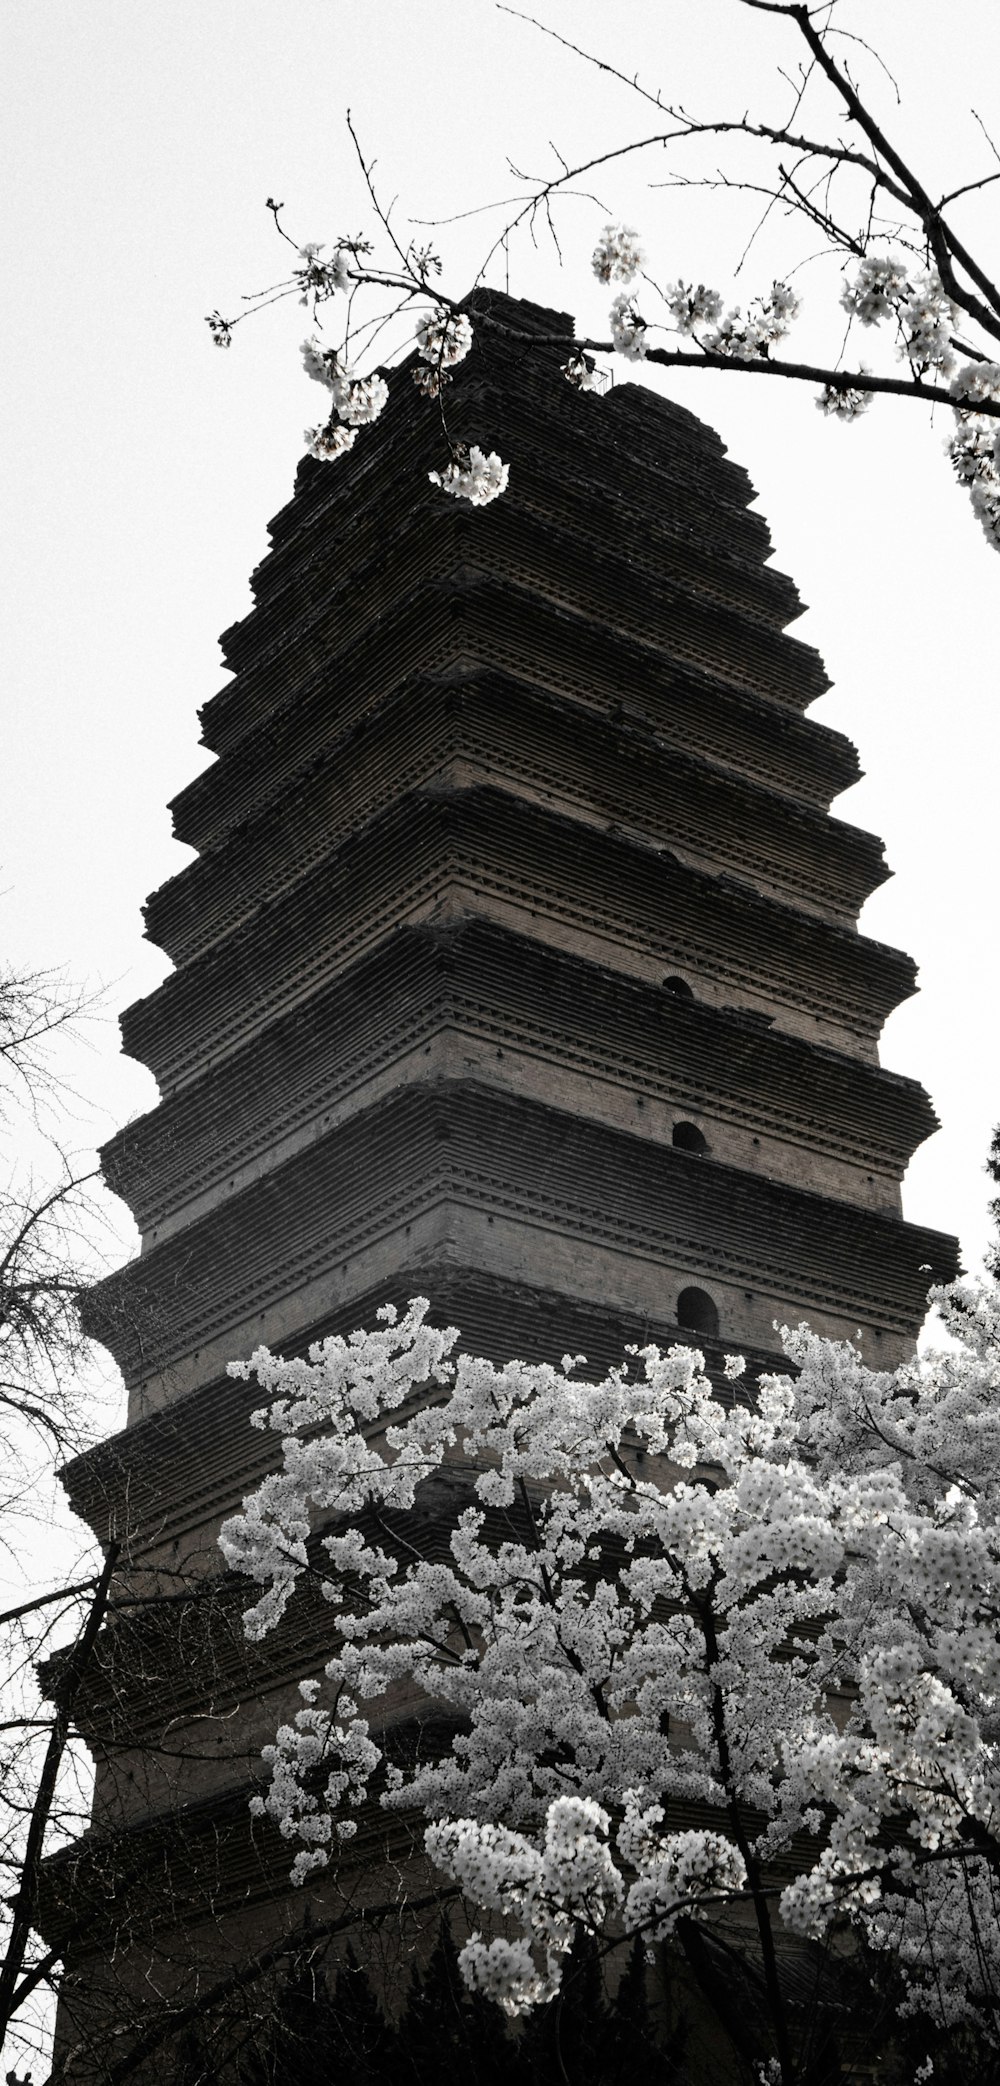 a tall tower sitting next to a tree with white flowers